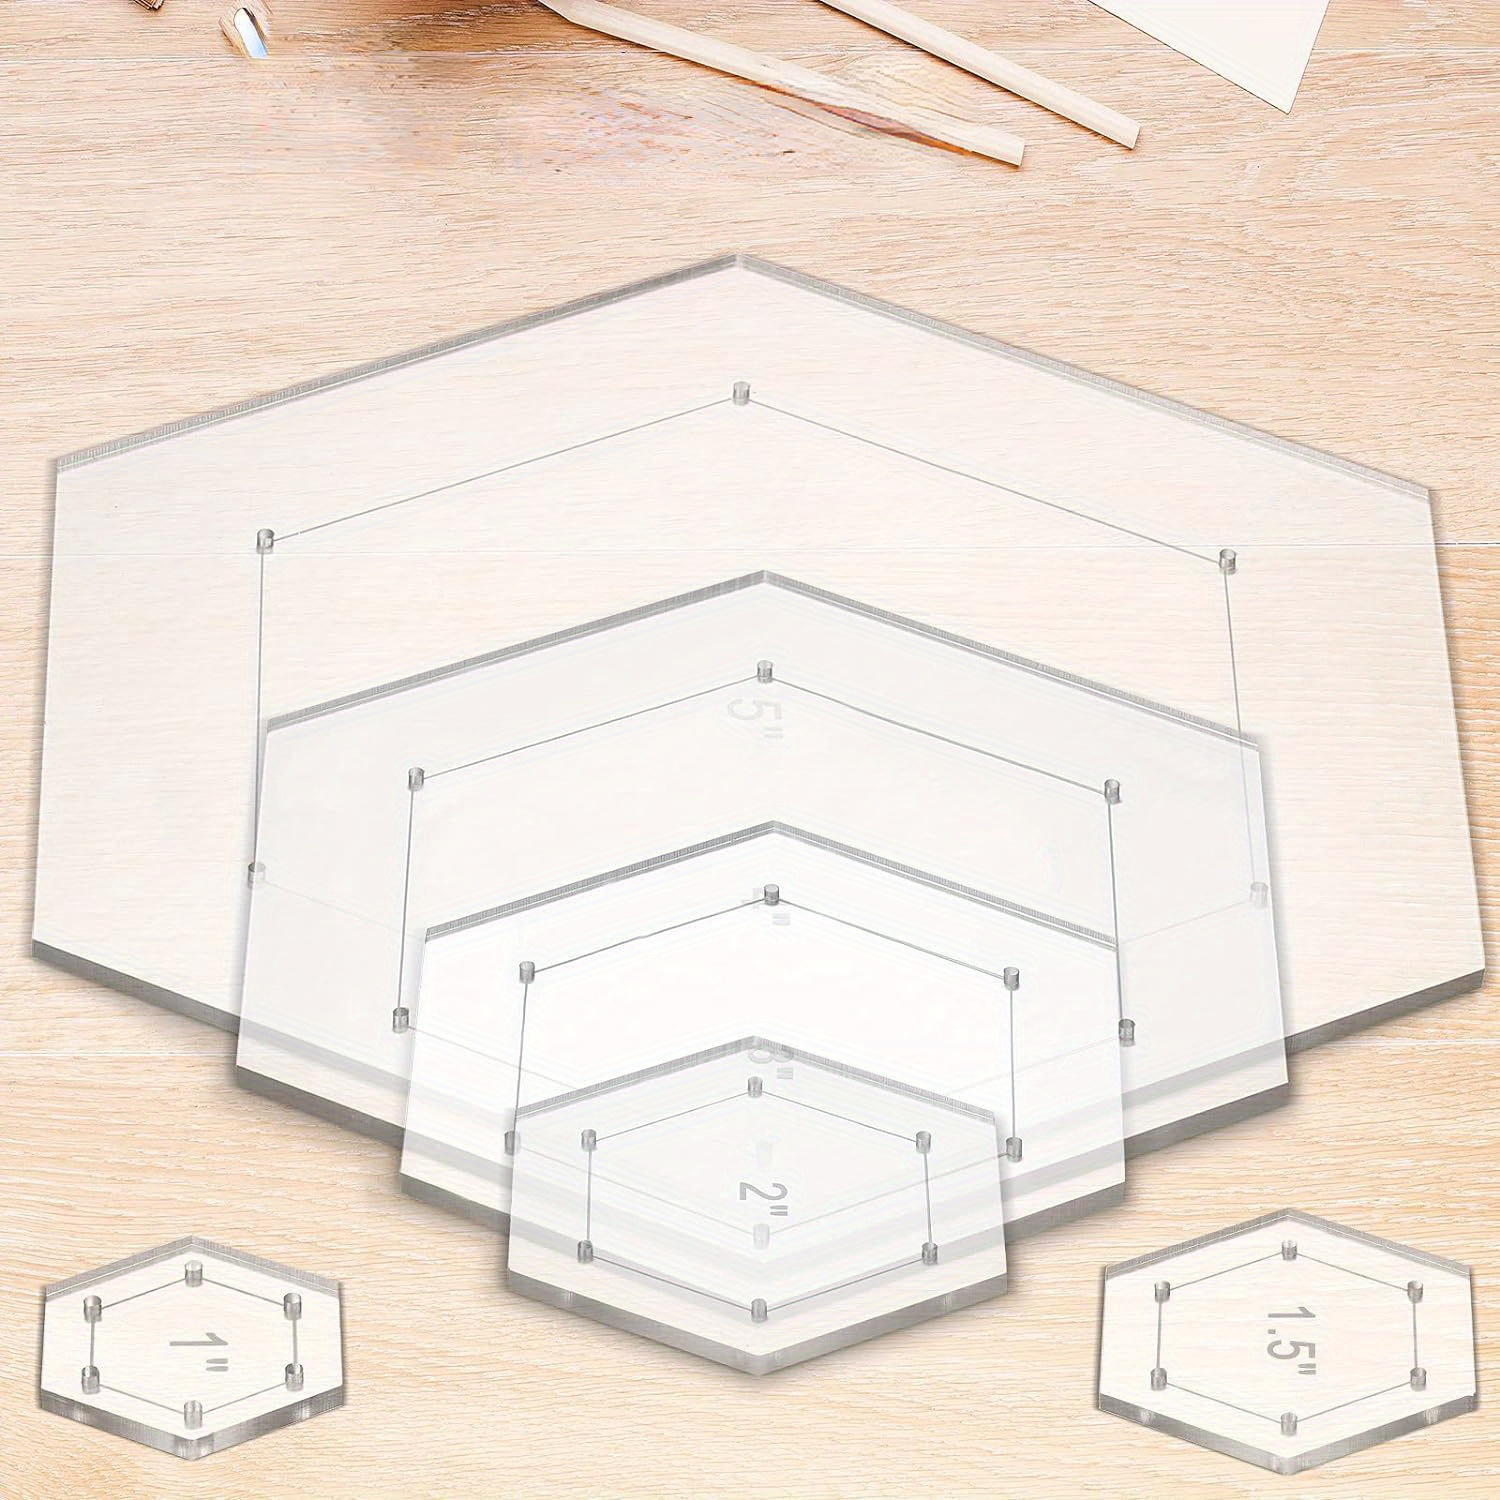 

6pcs/set Hexagon Quilting Templates 1in, 1.5in, 2in, 3in, 4in, 5in With 1/4in Seam Allowance, Acrylic Quilting Templates For Diy Quilting Sewing Crafts